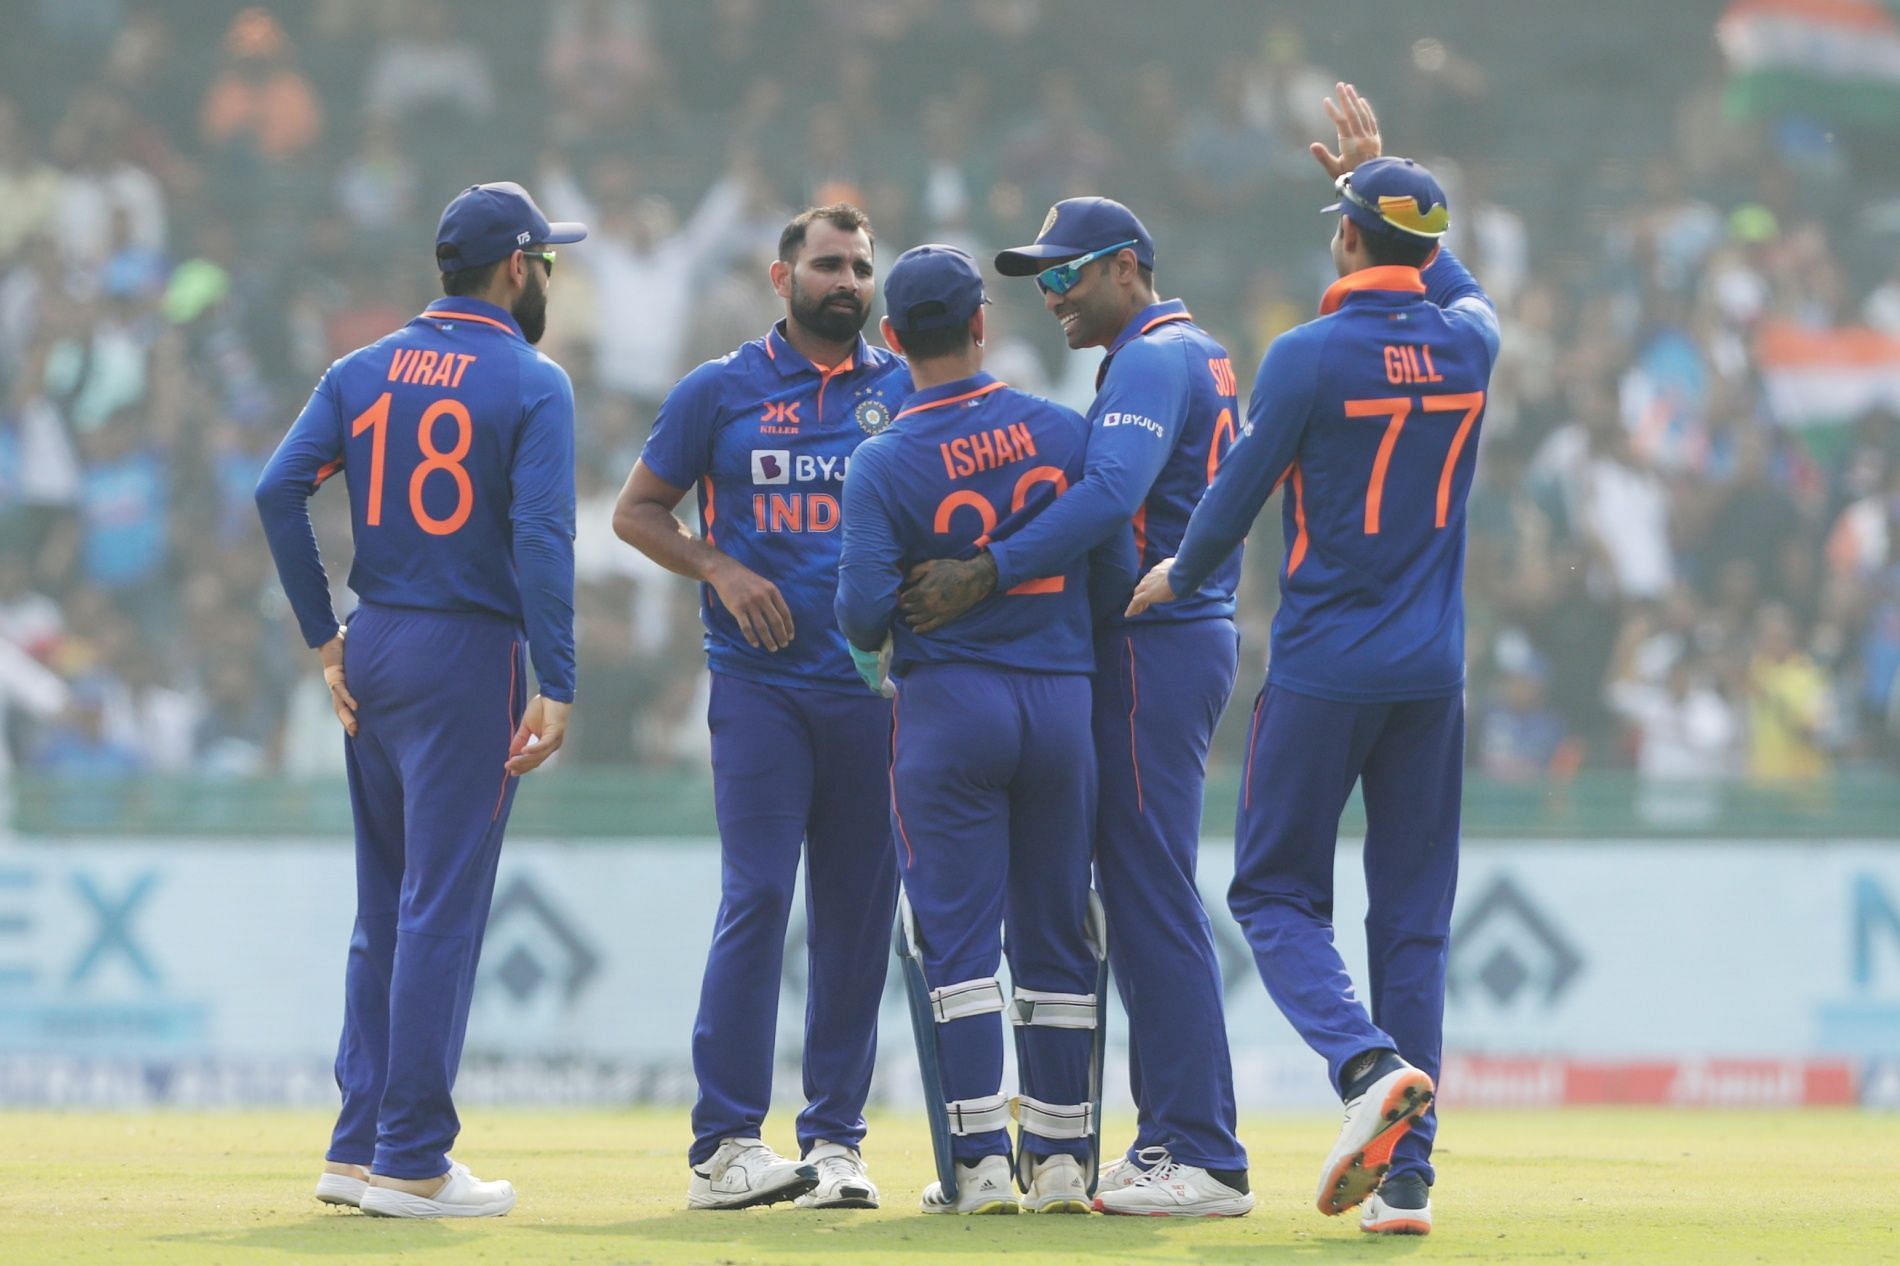 Mohammed Shami’s frank reply on whether India are ‘better prepared’ for 2023 World Cup: “Don’t think people have any doubts about team’s ability”